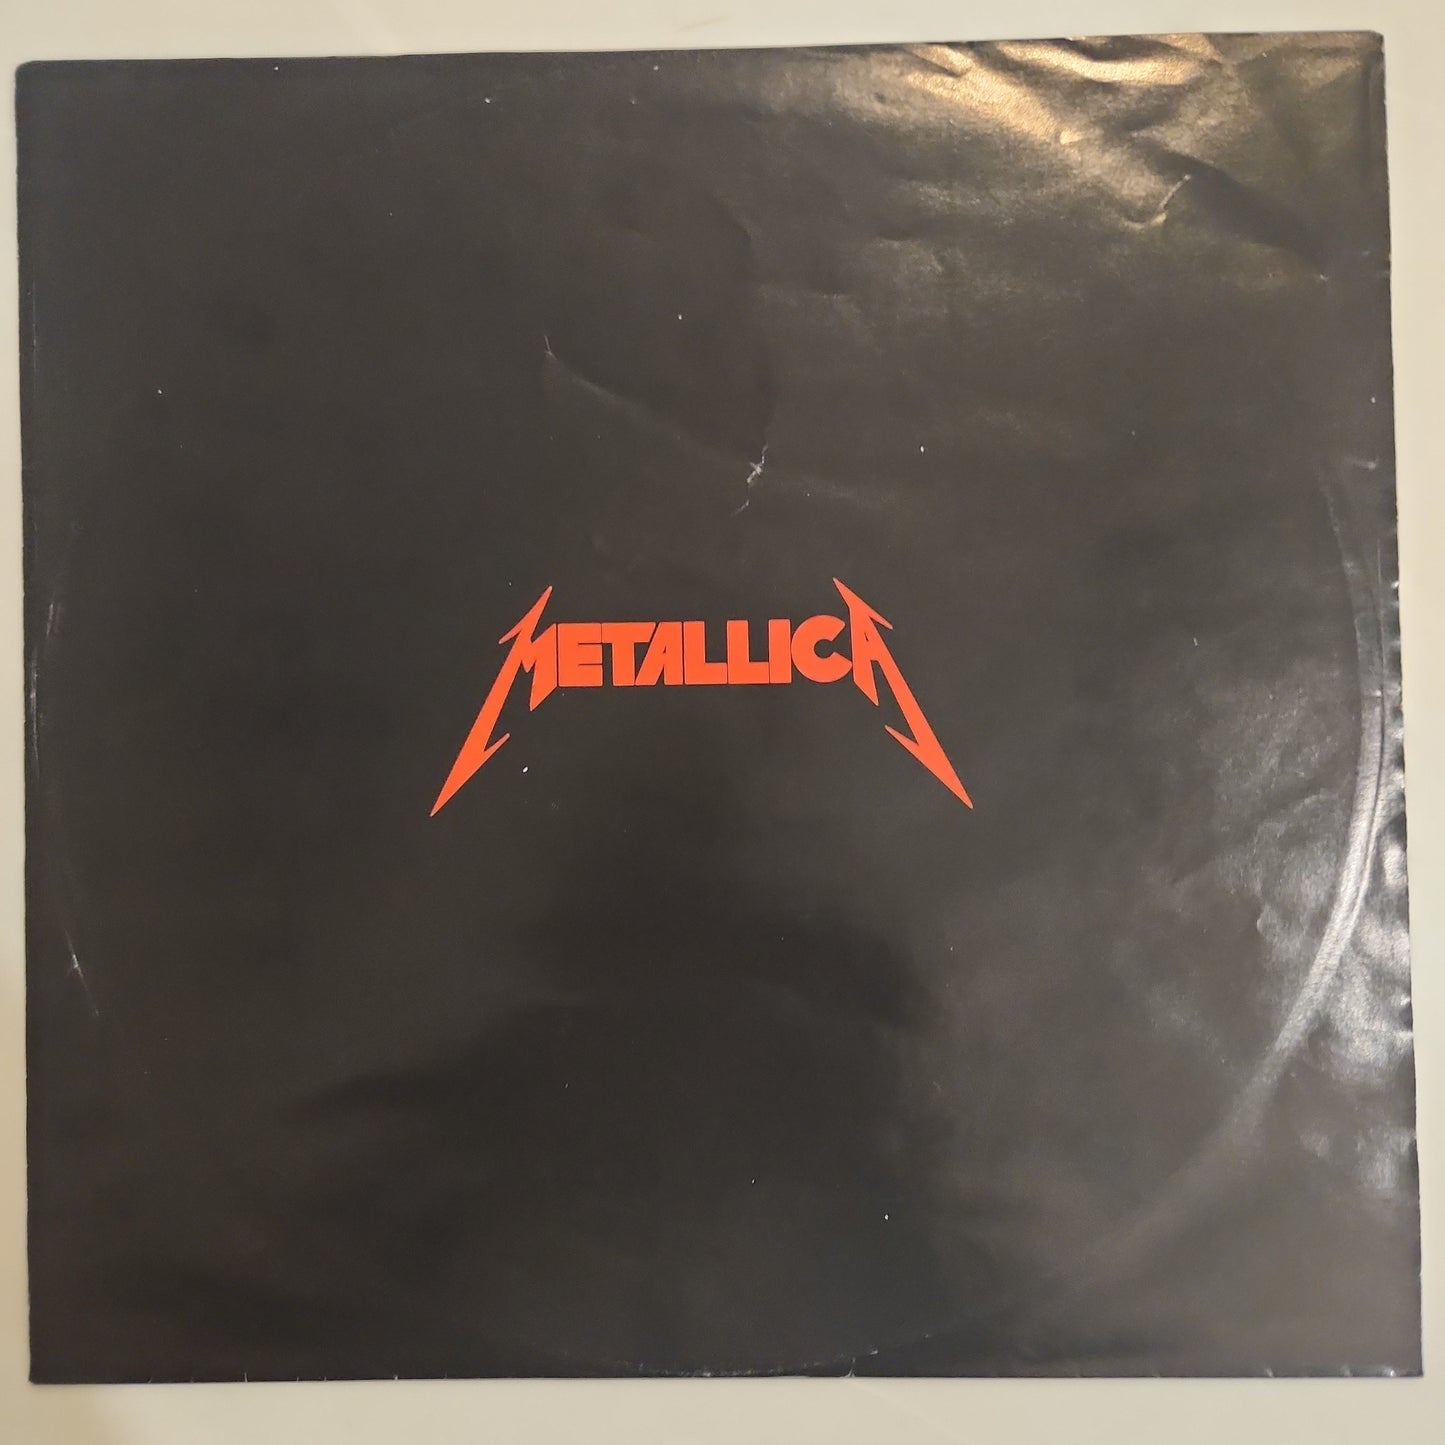 Metallica - ...And Justic For All (D83)